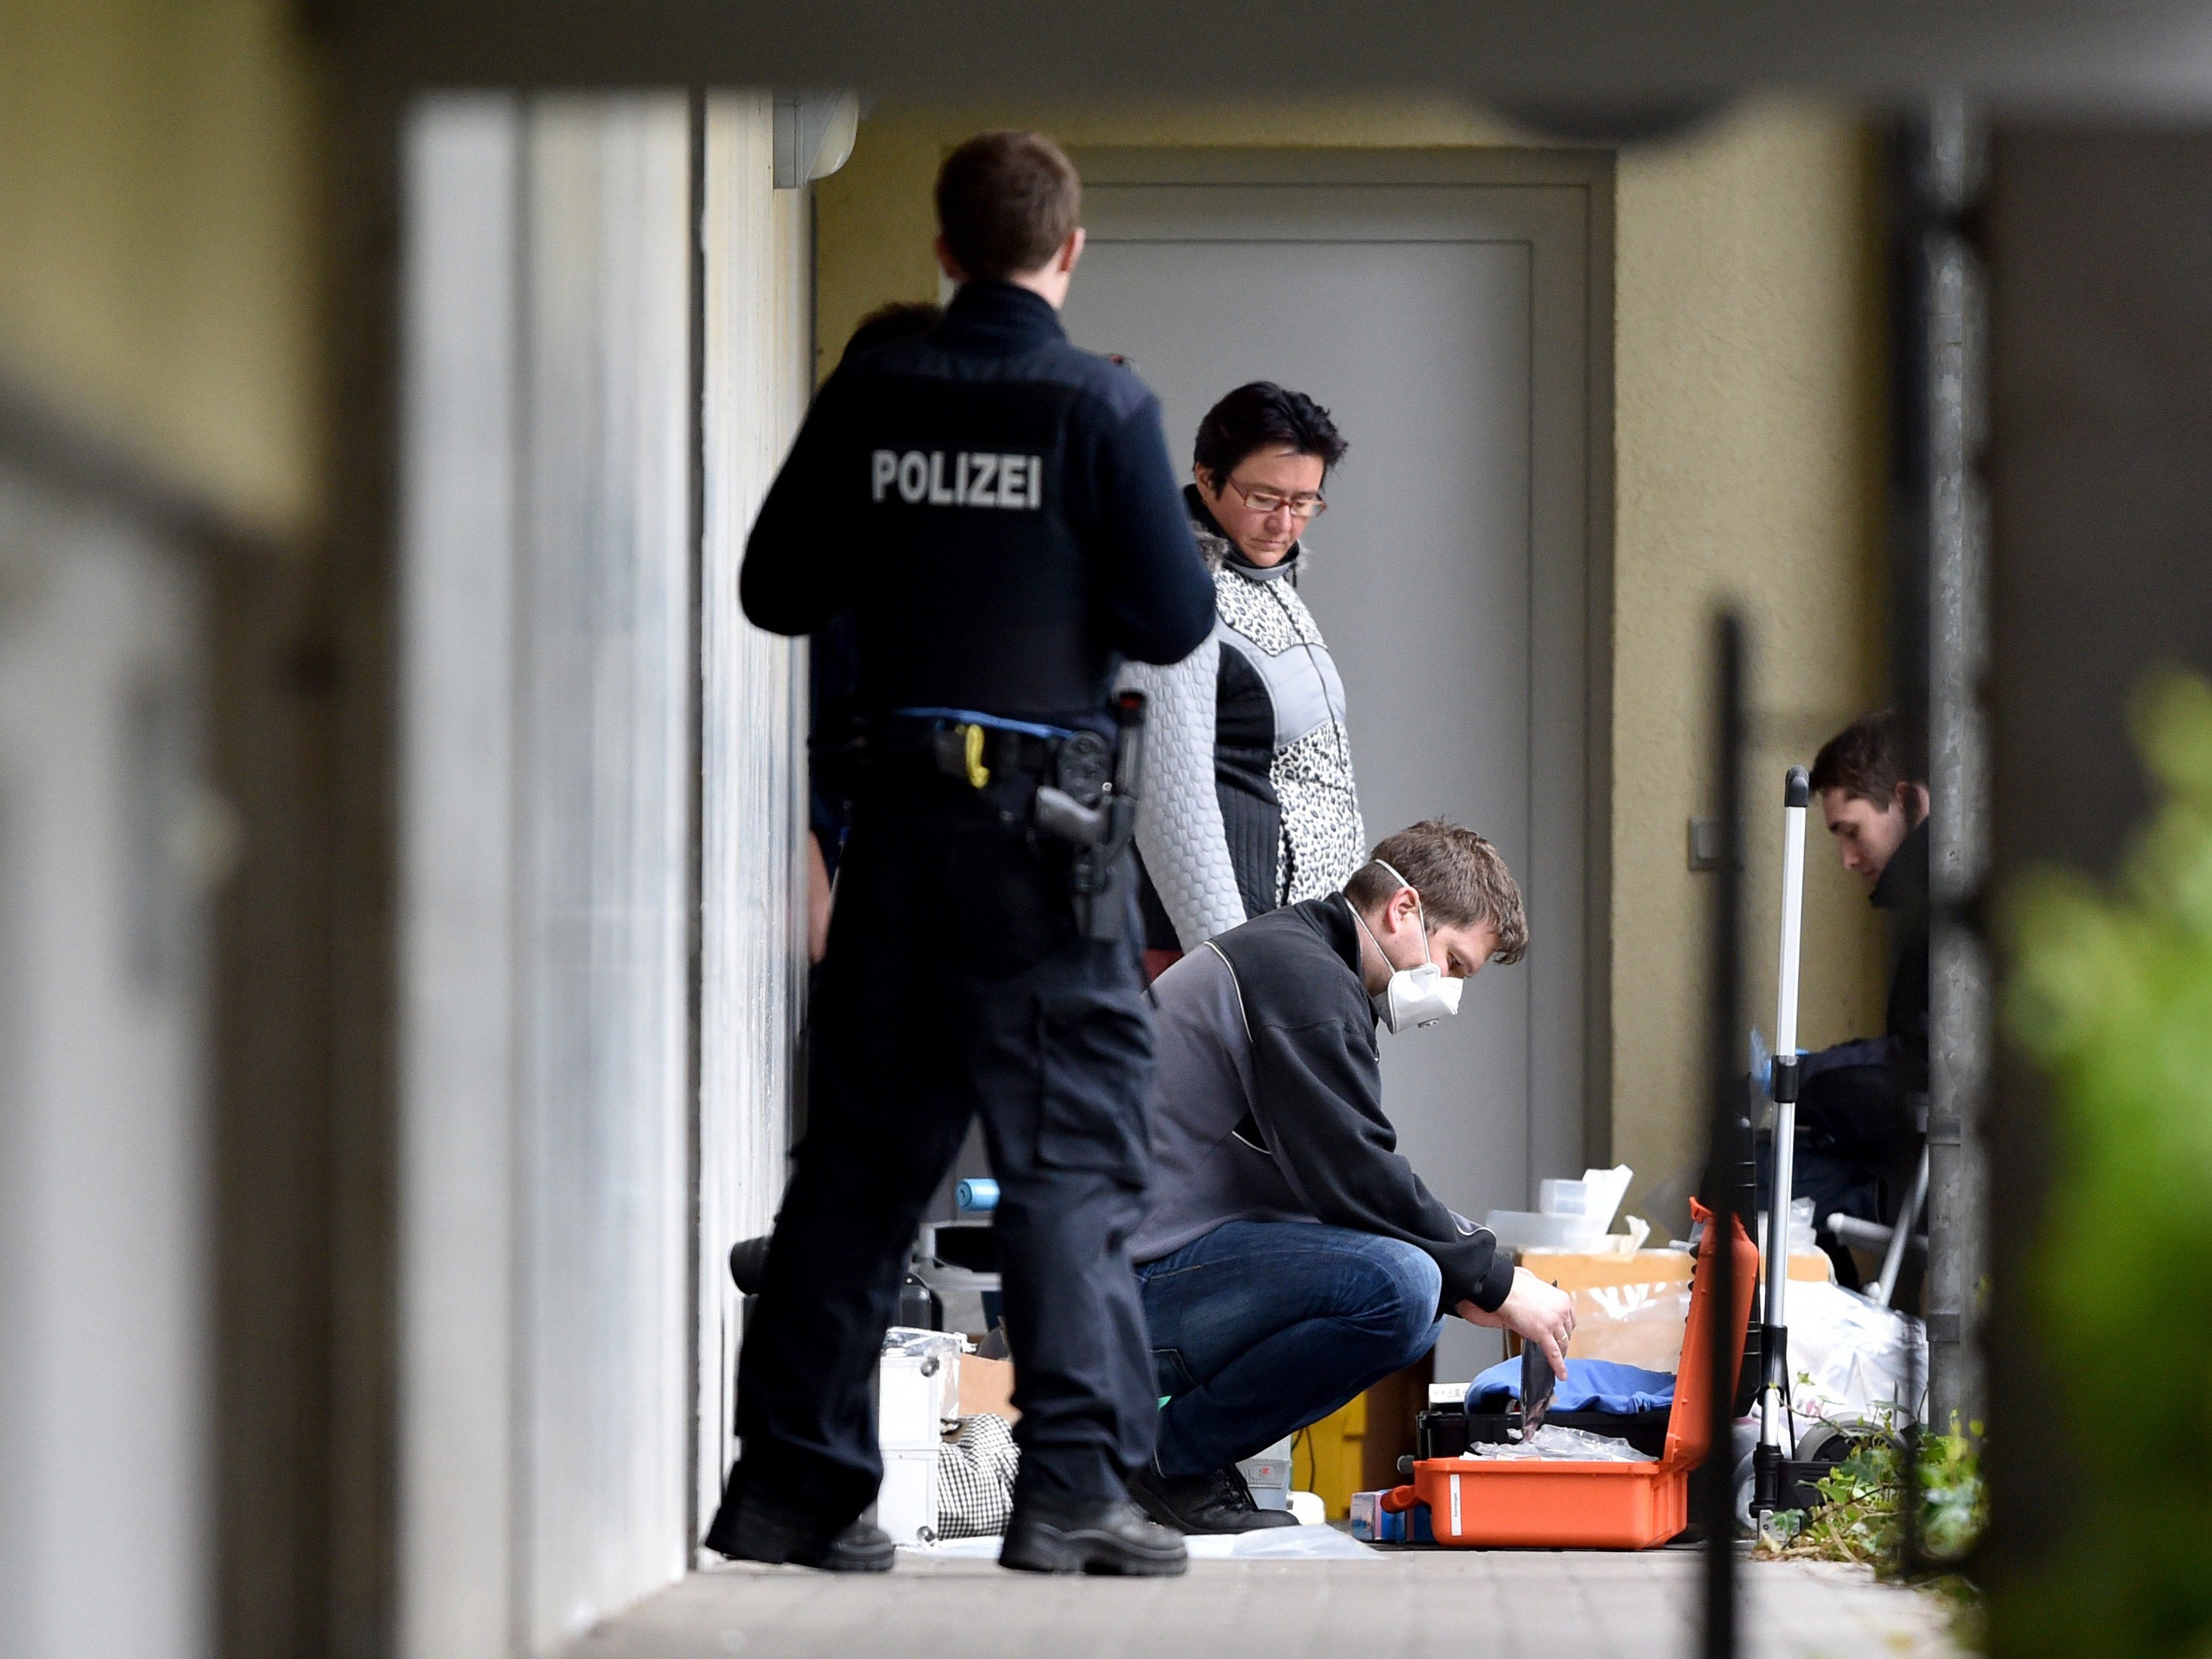 Experts from the police secure evidence at the couple's apartment complex in Oberursel